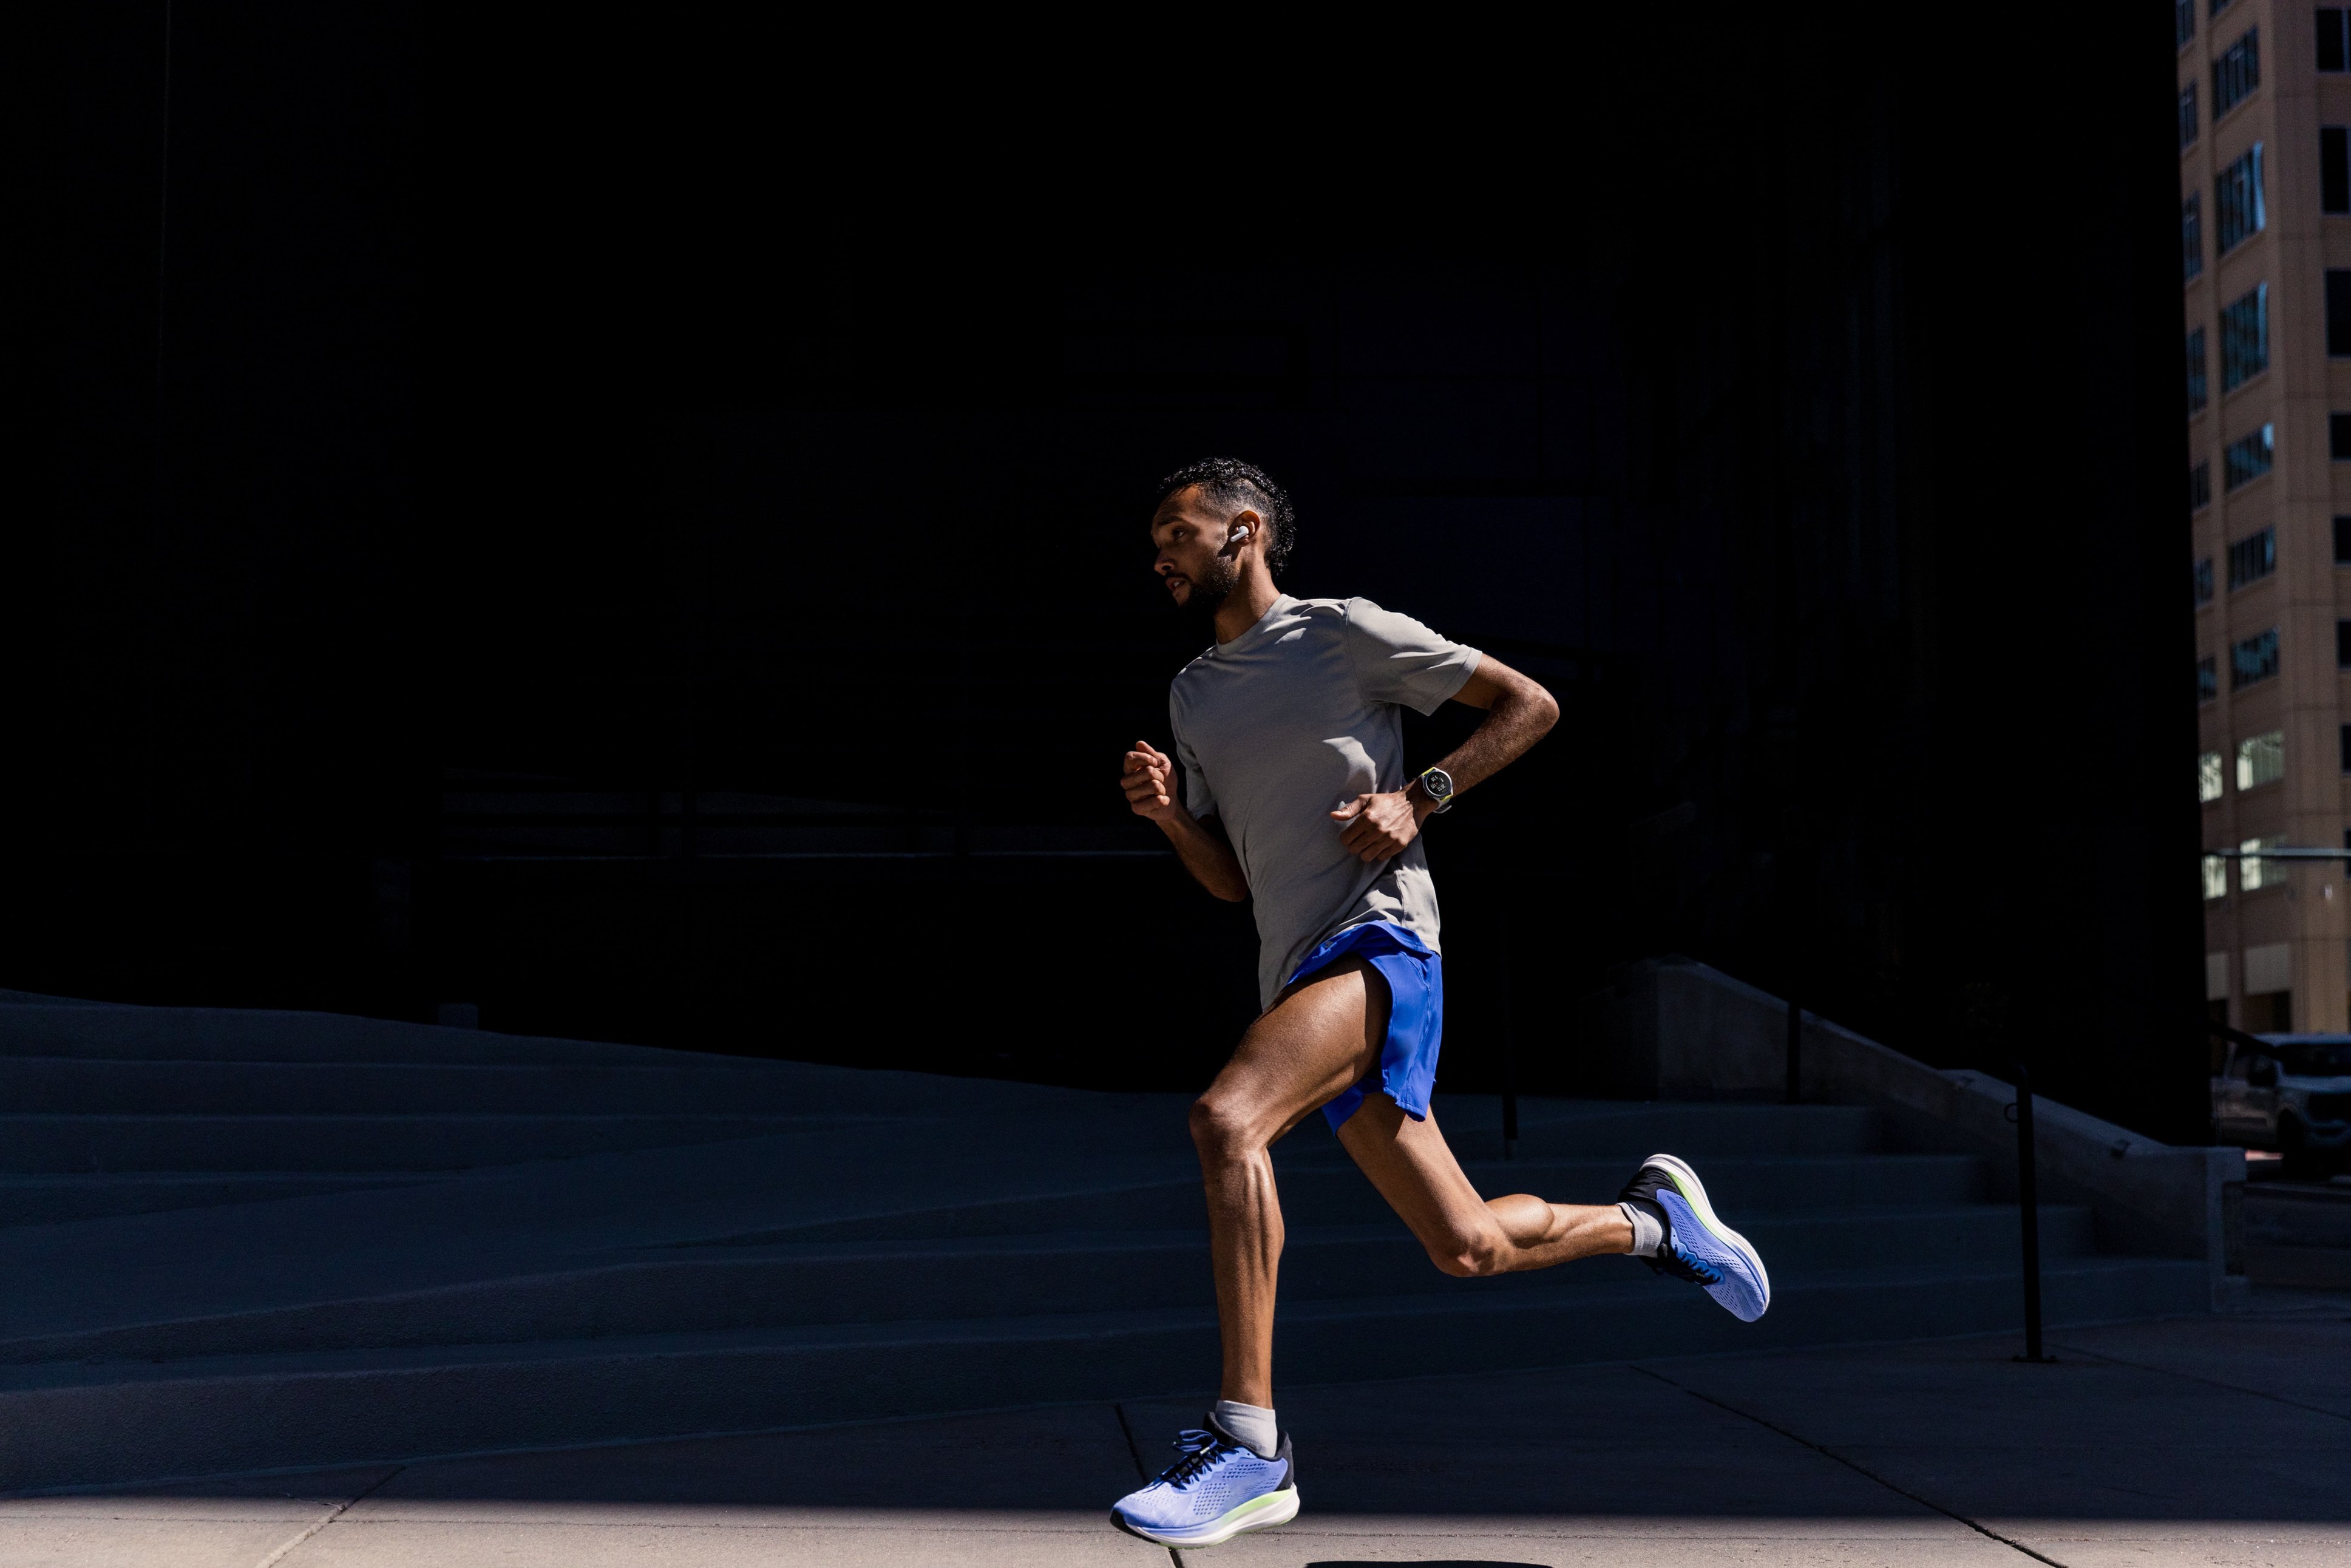 Amazfit Cheetah Series update introduces power metric for runners